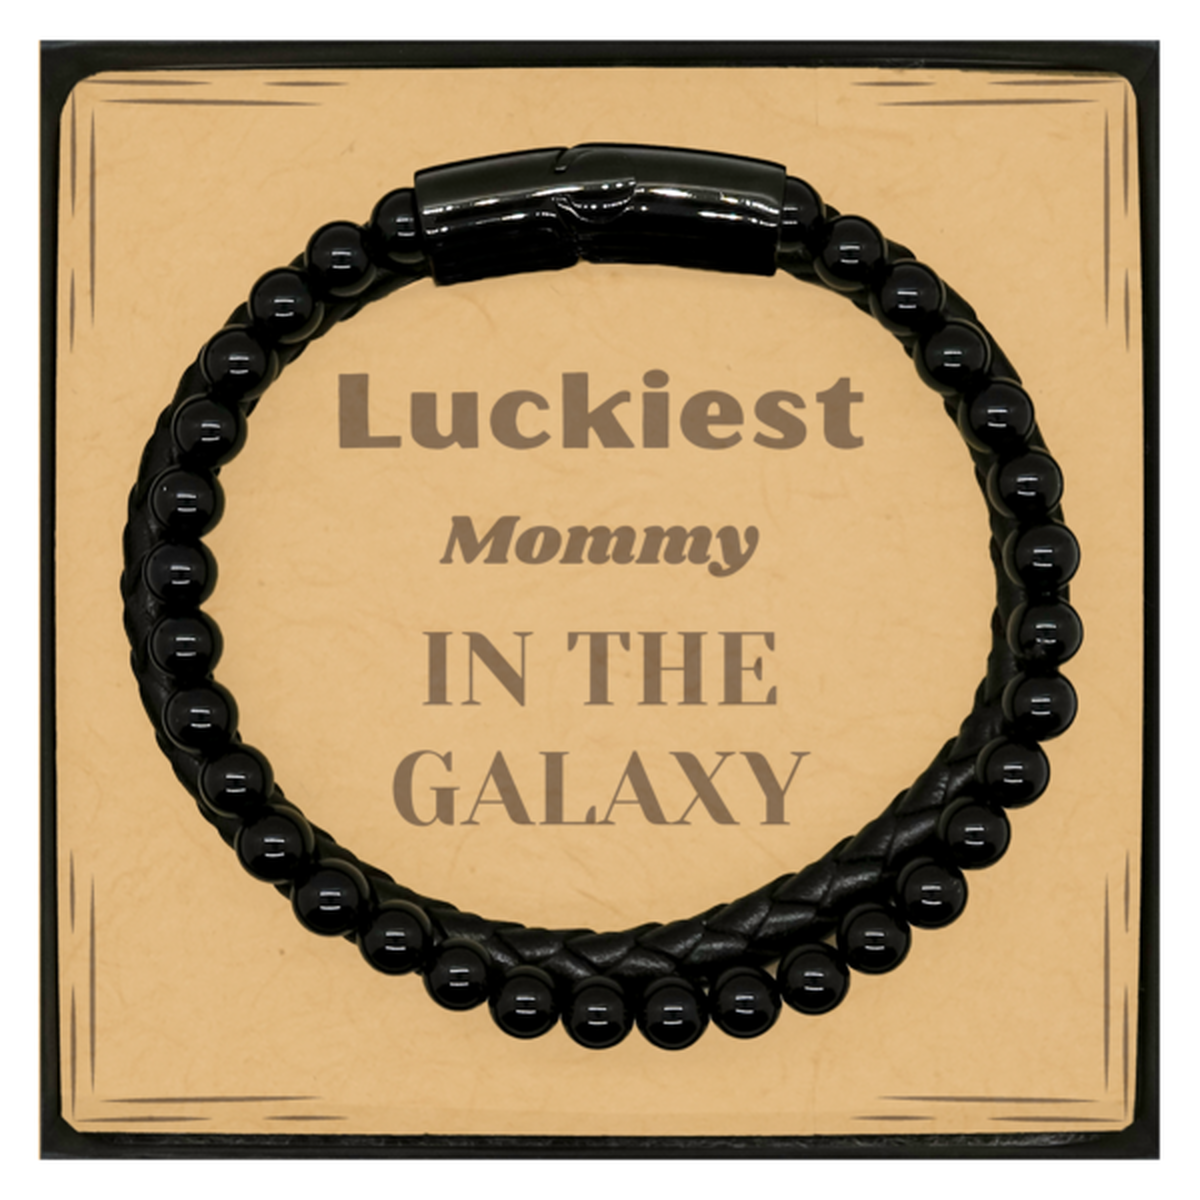 Luckiest Mommy in the Galaxy, To My Mommy Message Card Gifts, Christmas Mommy Stone Leather Bracelets Gifts, X-mas Birthday Unique Gifts For Mommy Men Women